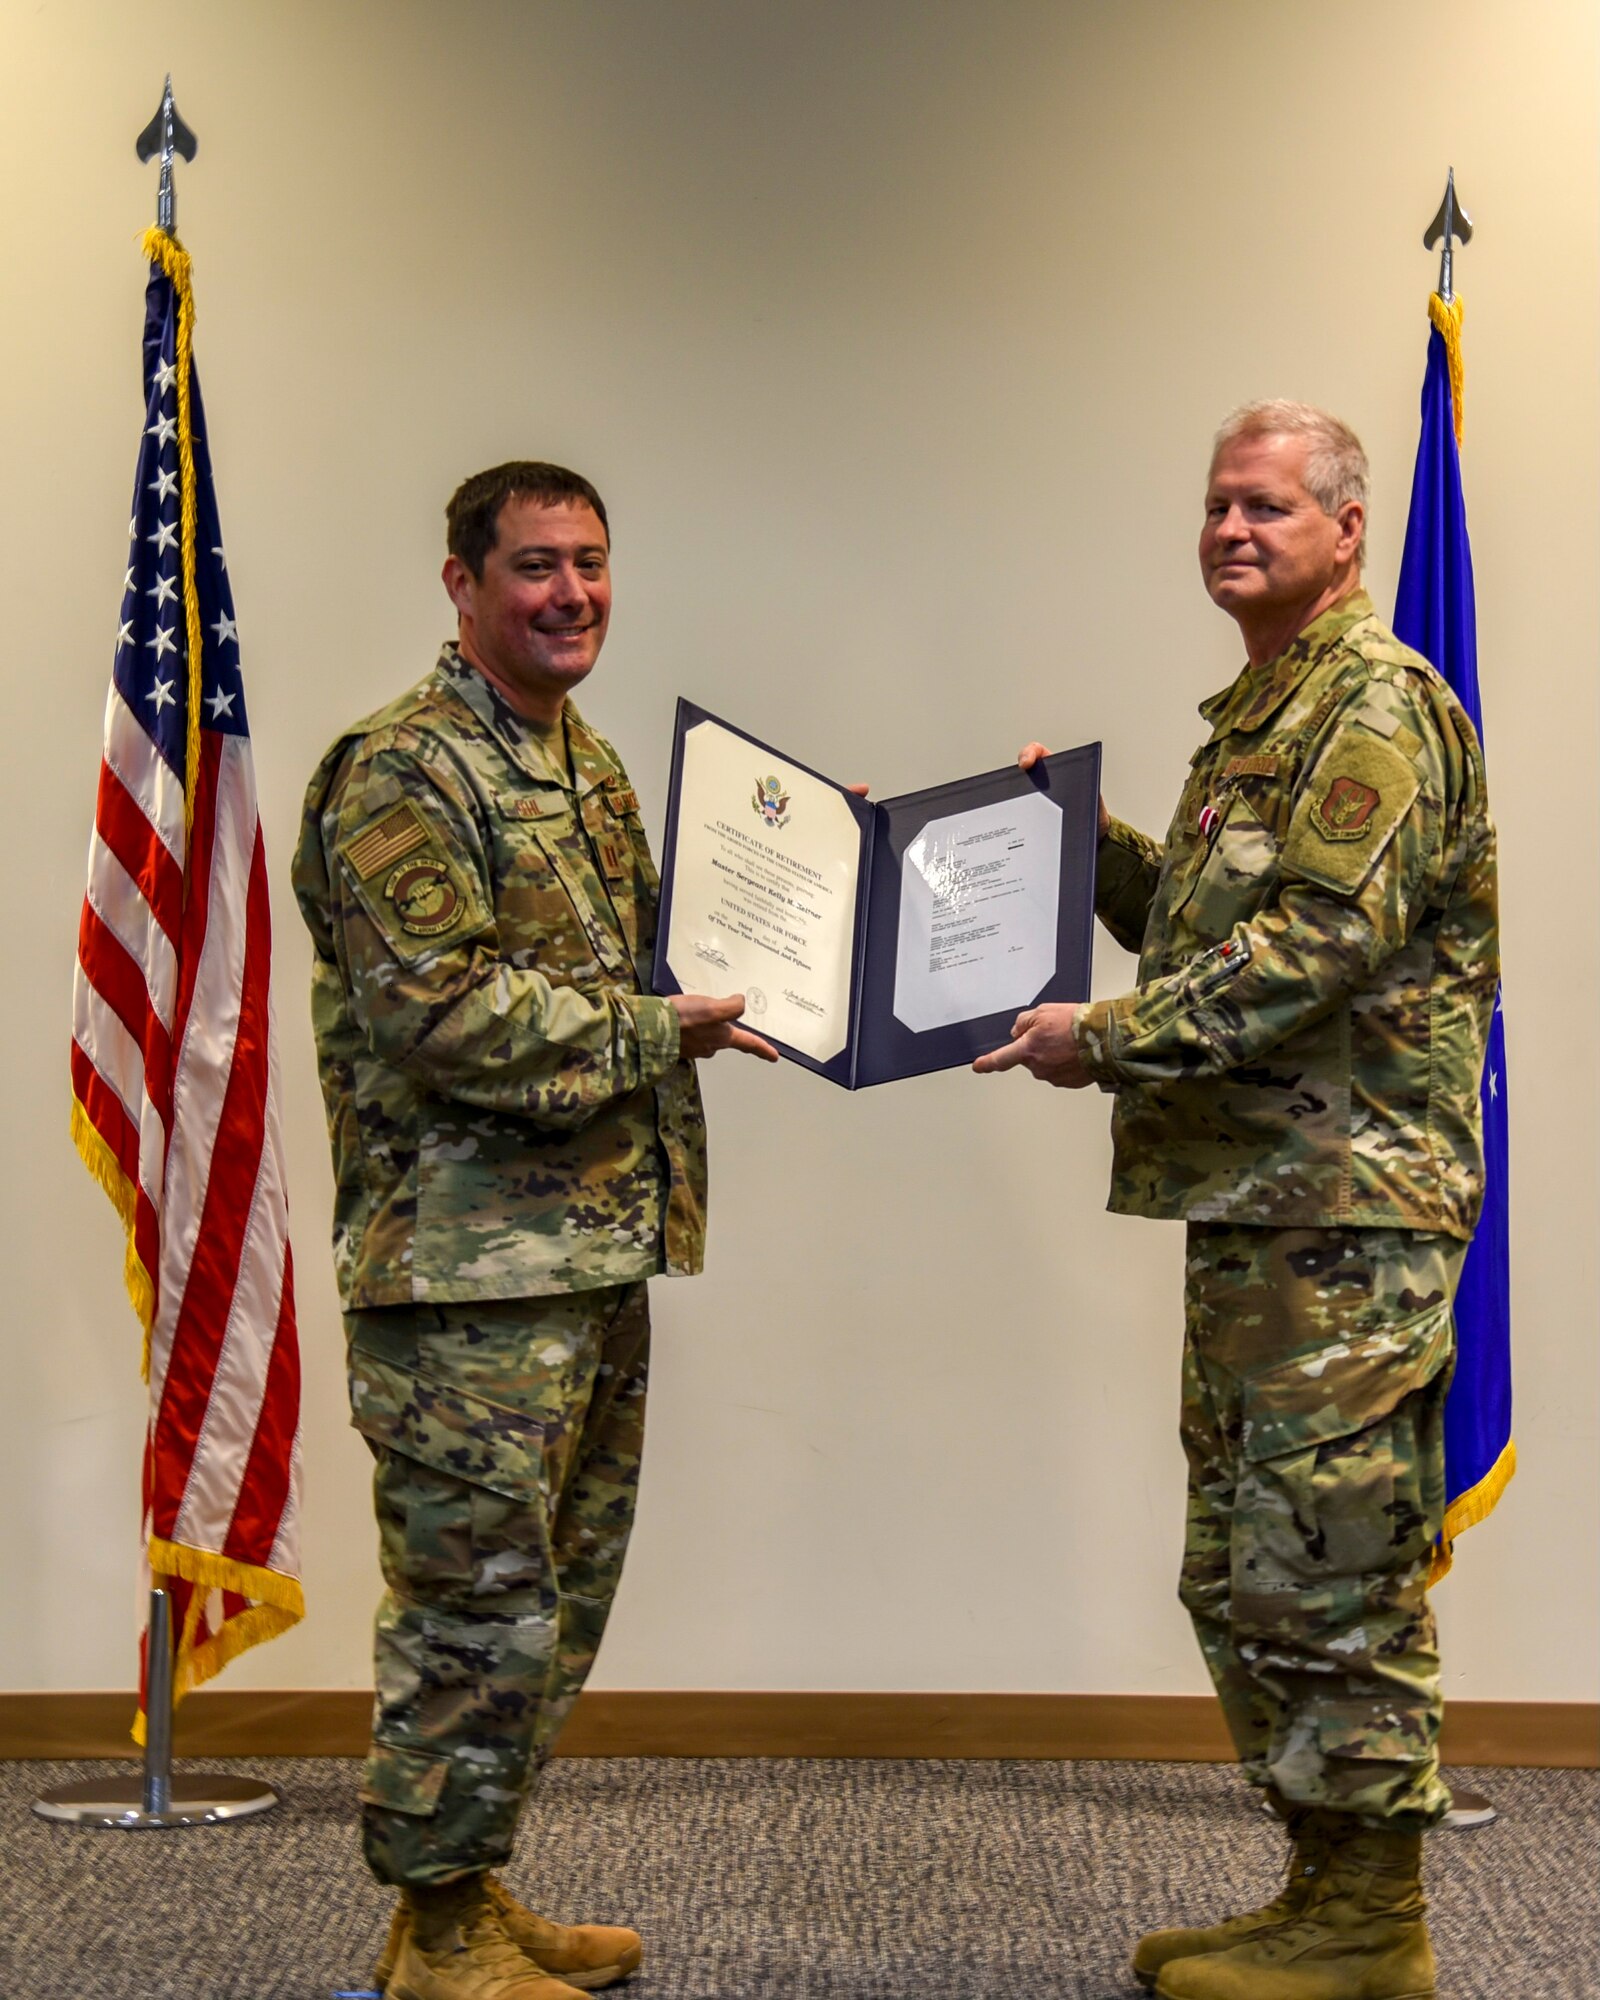 Capt. Anthony Gehl of the 403rd Aircraft Maintenance Squadron, presents Master Sgt. James Rials with his certificate of retirement at the Roberts Consolidated Maintenance Facility Dec. 6, 2020. Rials retired after serving nearly 40 years, all with the Air Force Reserve's 403rd Wing at Keesler Air Force Base. (U.S. Air Force photo by Tech. Sgt. Lacey Matthews)